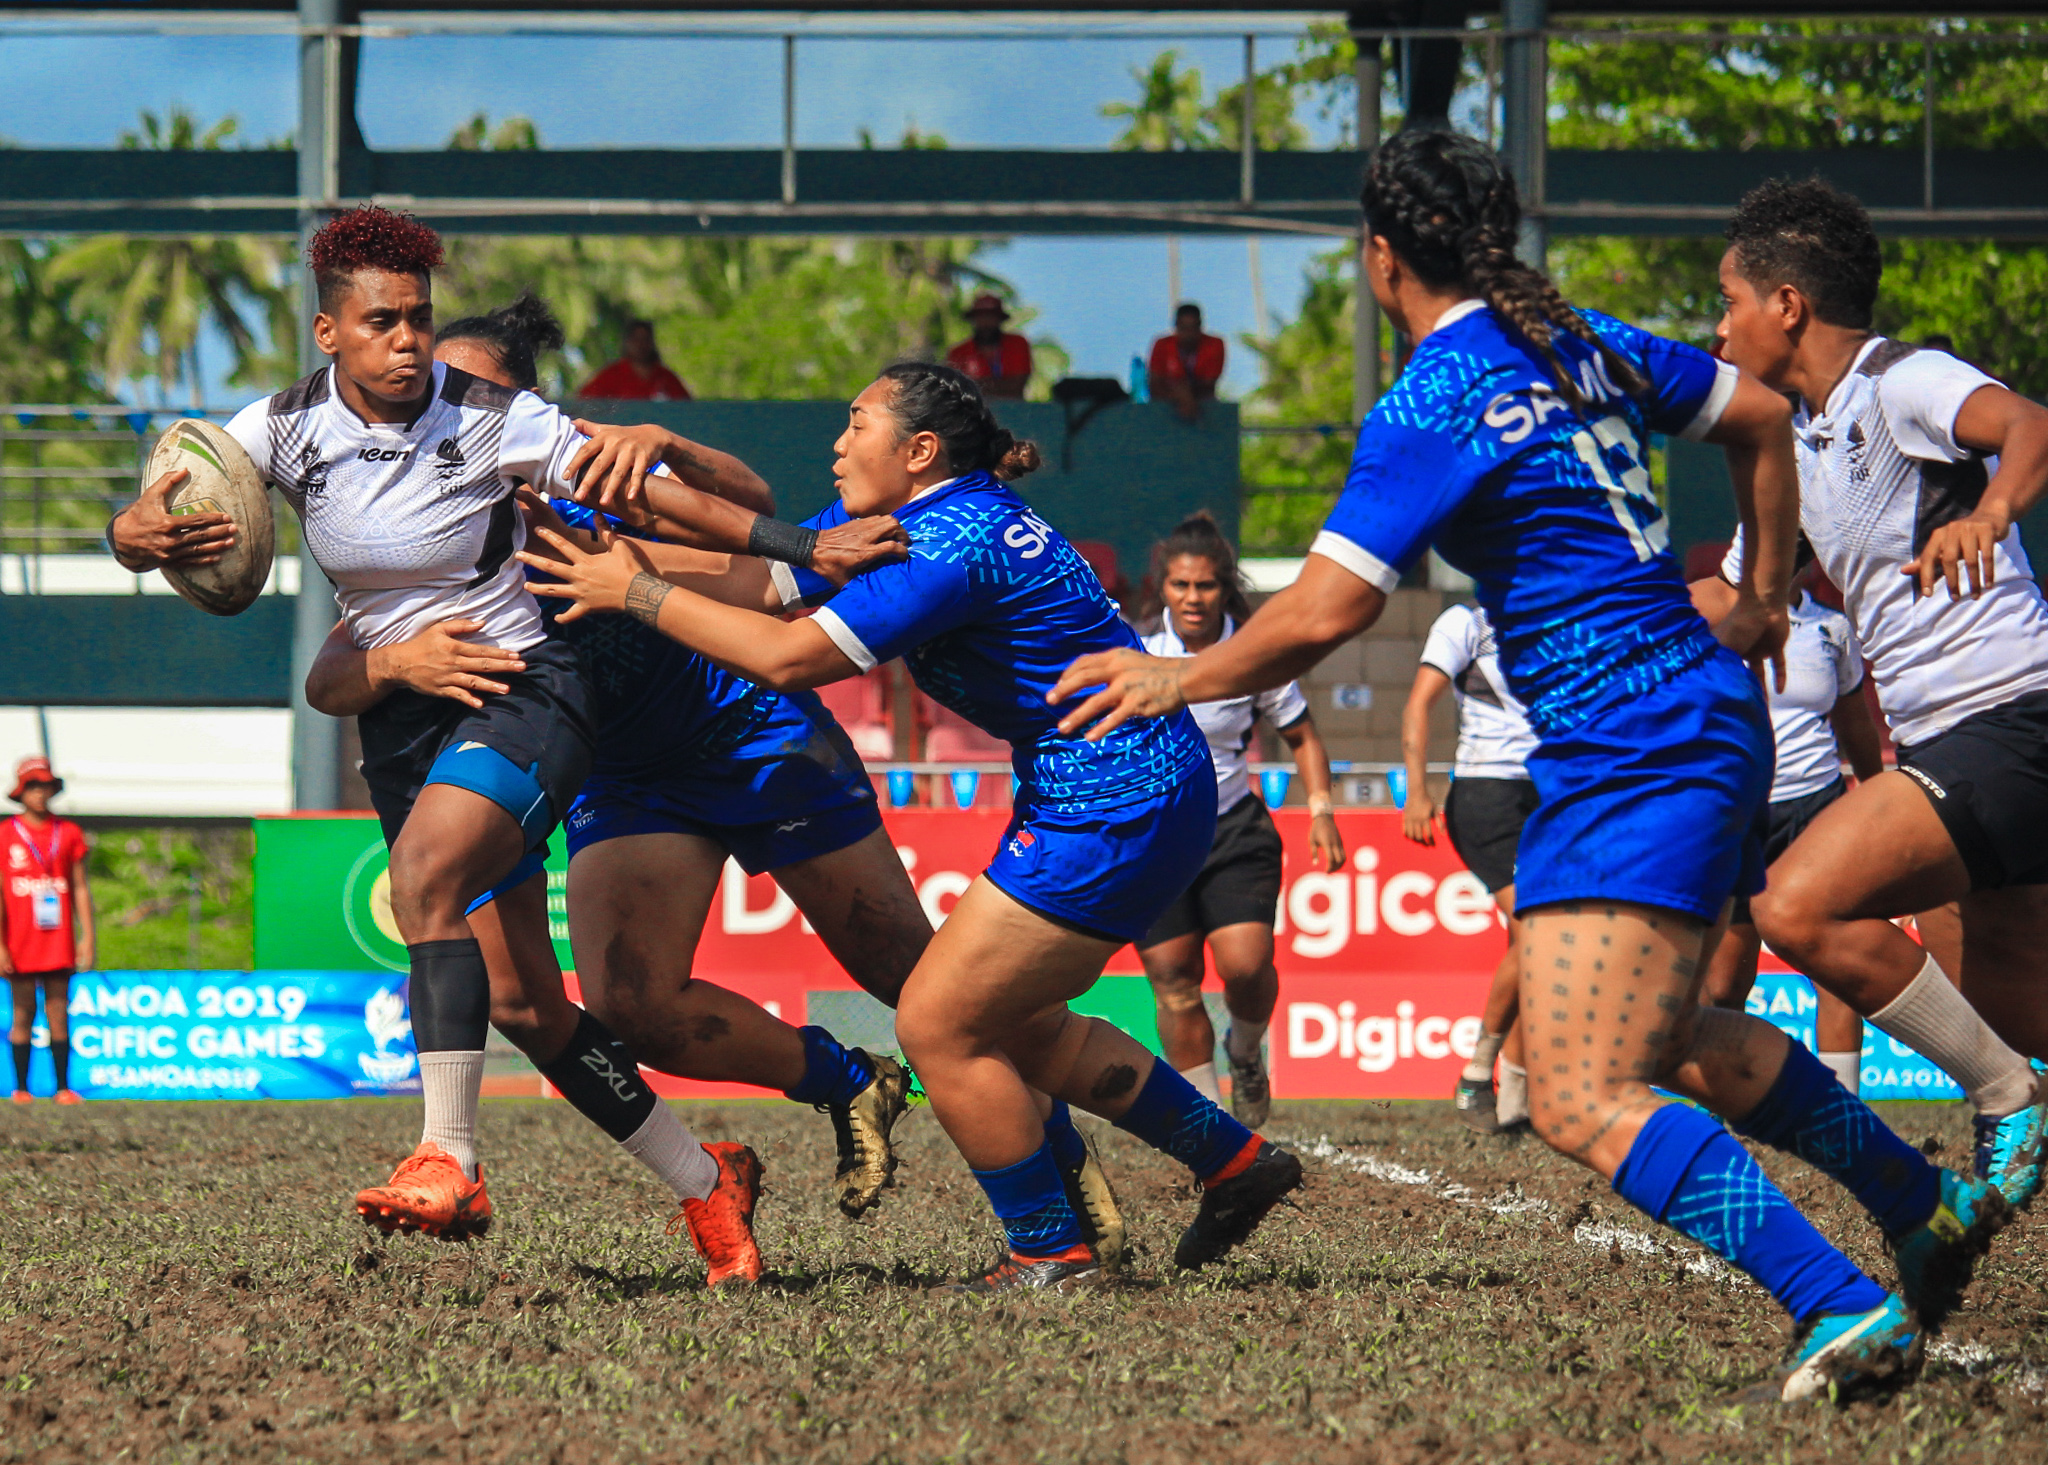 Women playing rugby league